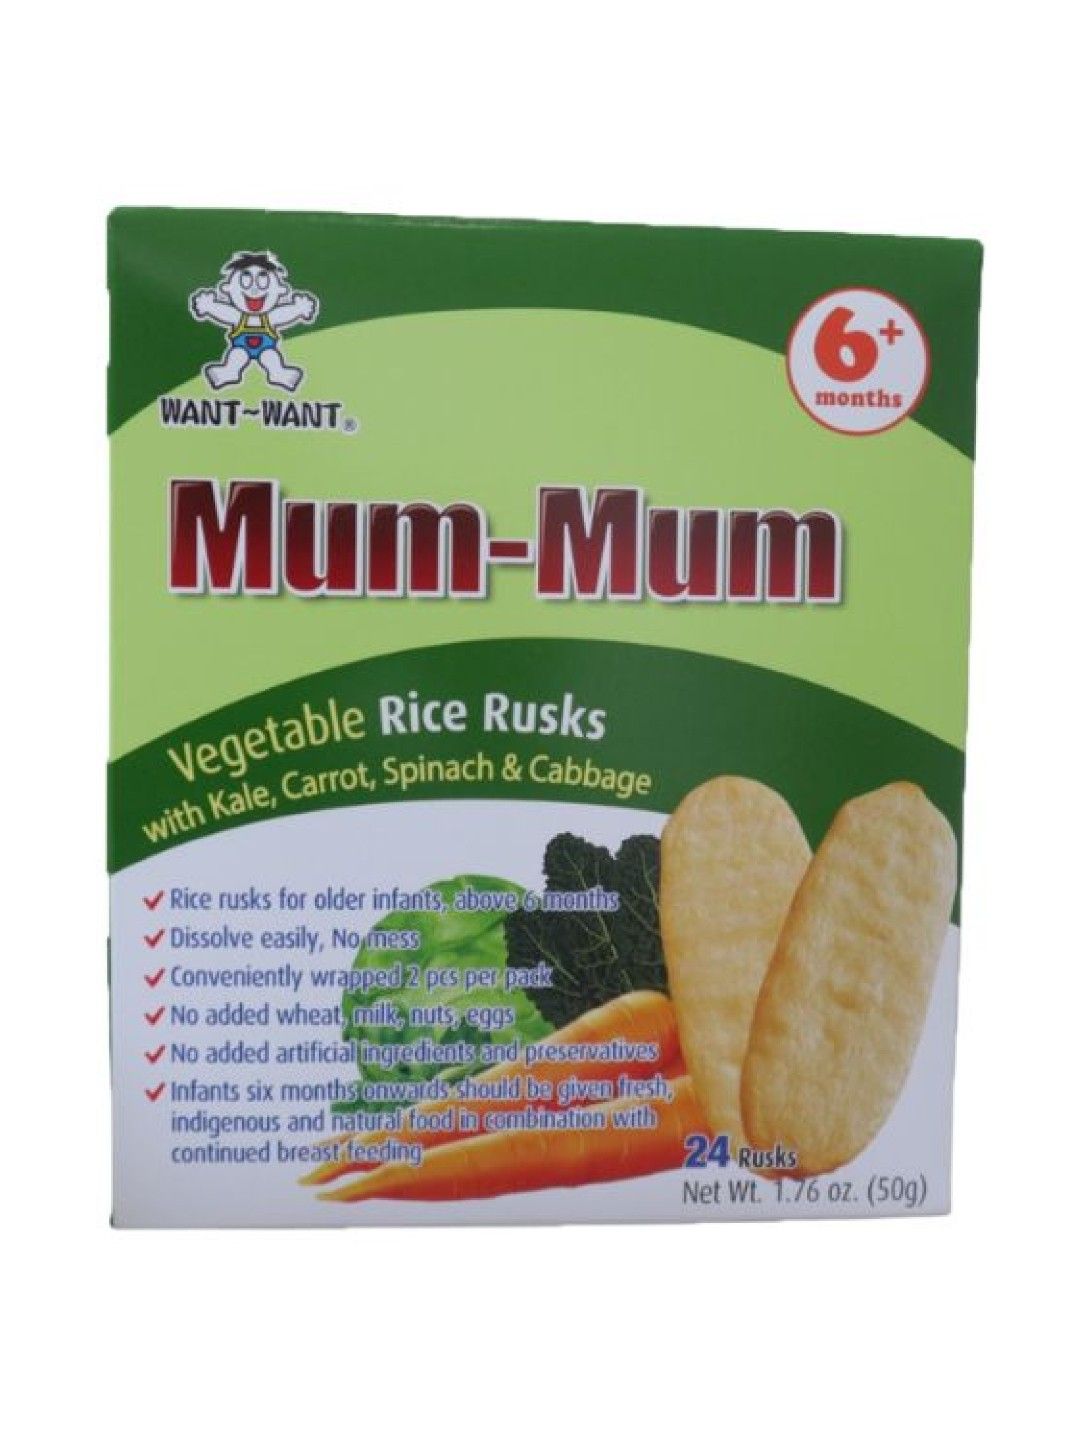 Baby Mum Mum All Natural Rice Biscuits for Kids